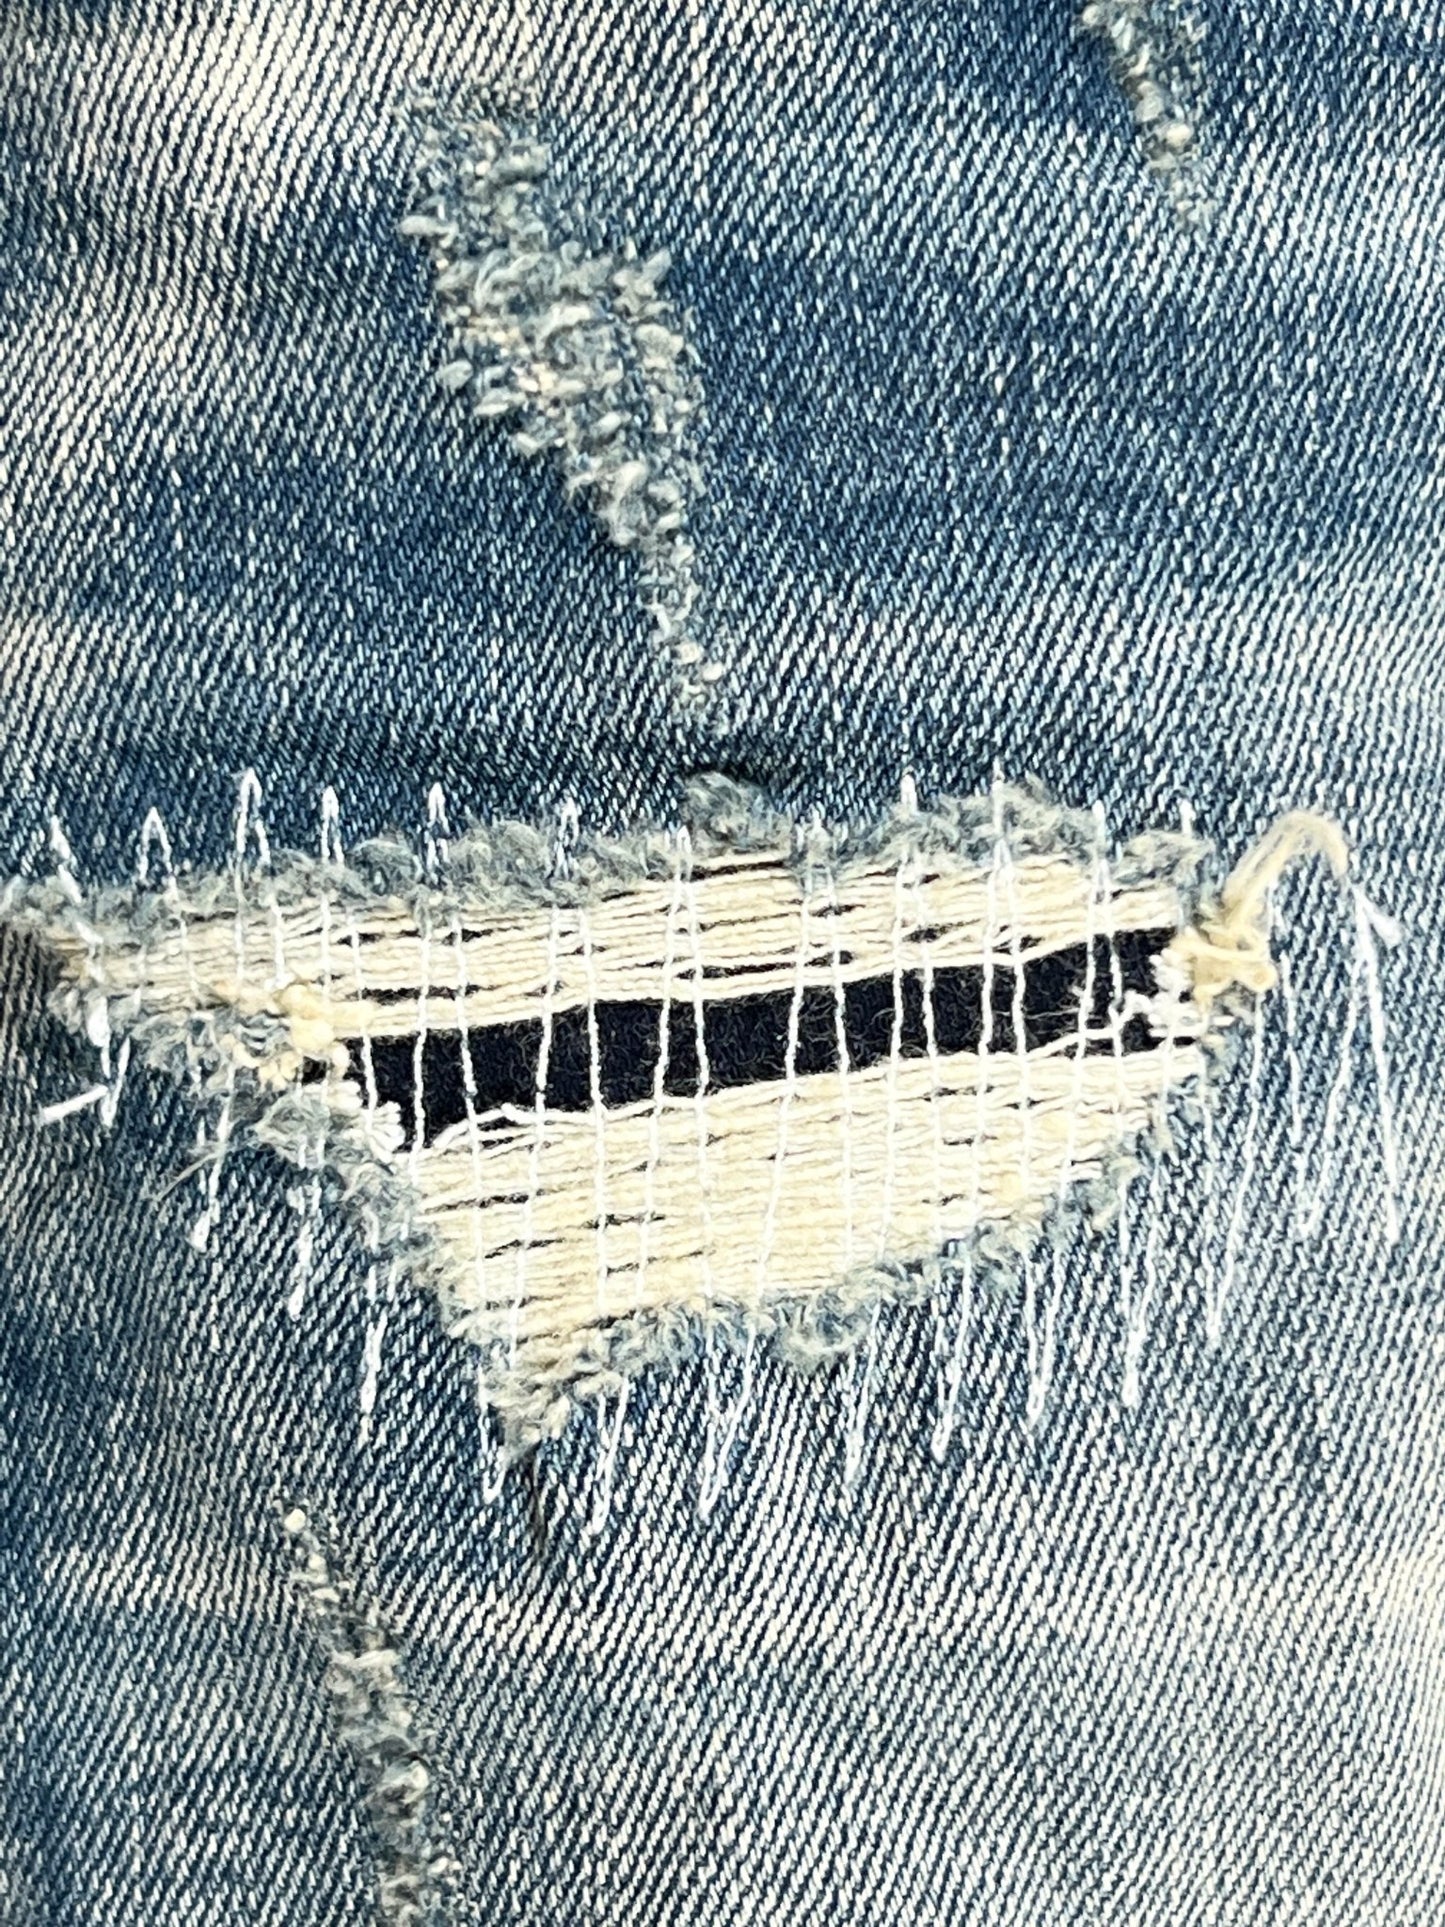 A close-up of a pair of PURPLE BRAND jeans, style P001-MIVM MID INDIGO VINTAGE MARBLE BLEACH, with holes in them.